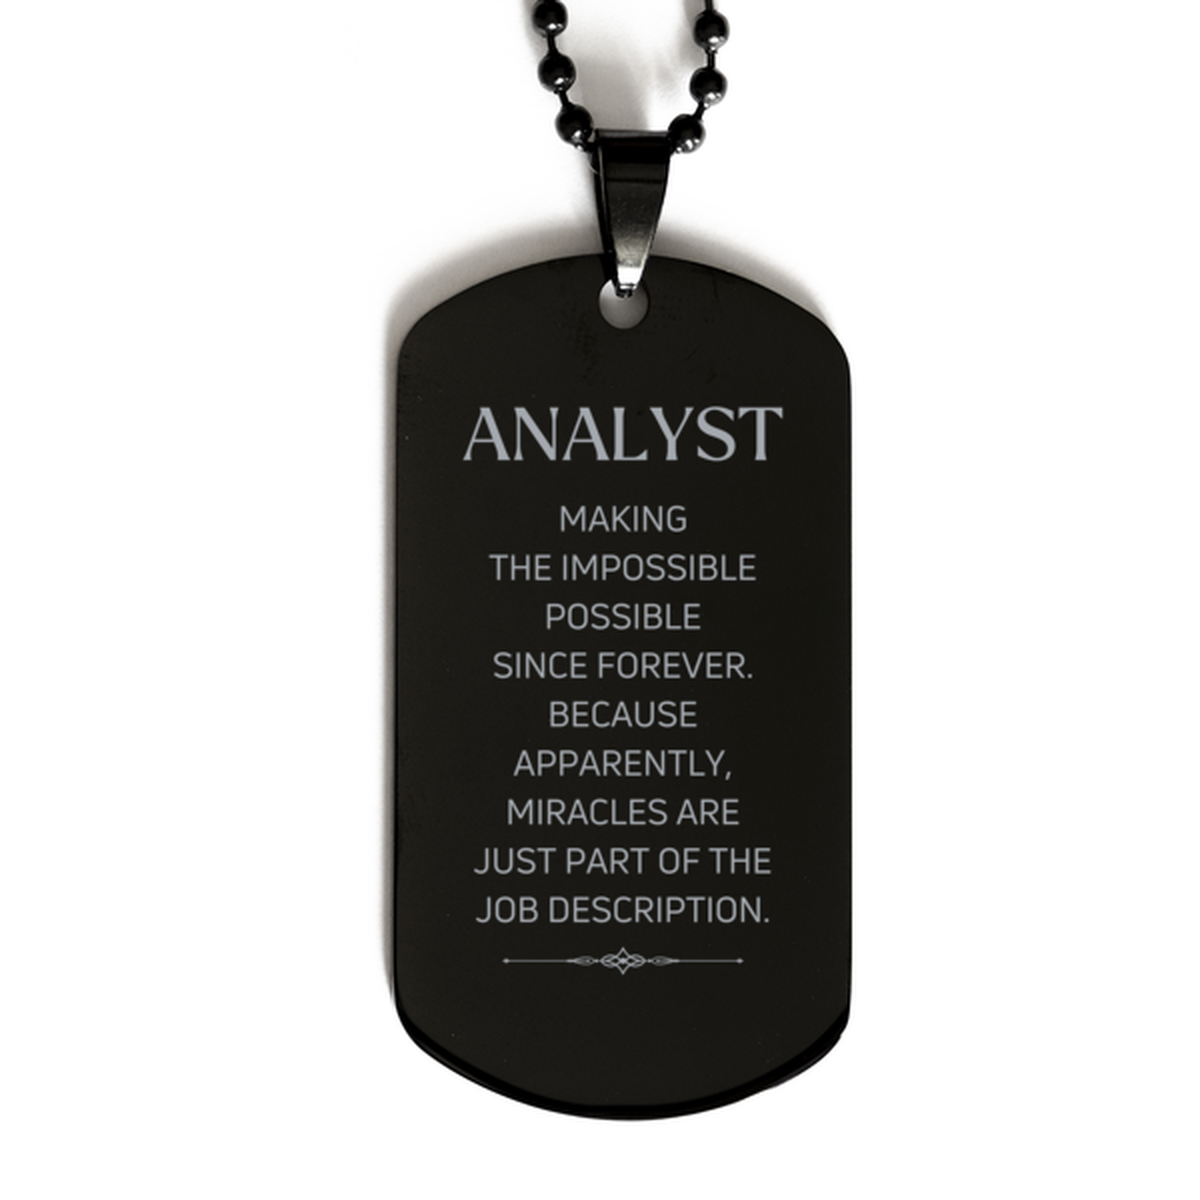 Funny Analyst Gifts, Miracles are just part of the job description, Inspirational Birthday Black Dog Tag For Analyst, Men, Women, Coworkers, Friends, Boss